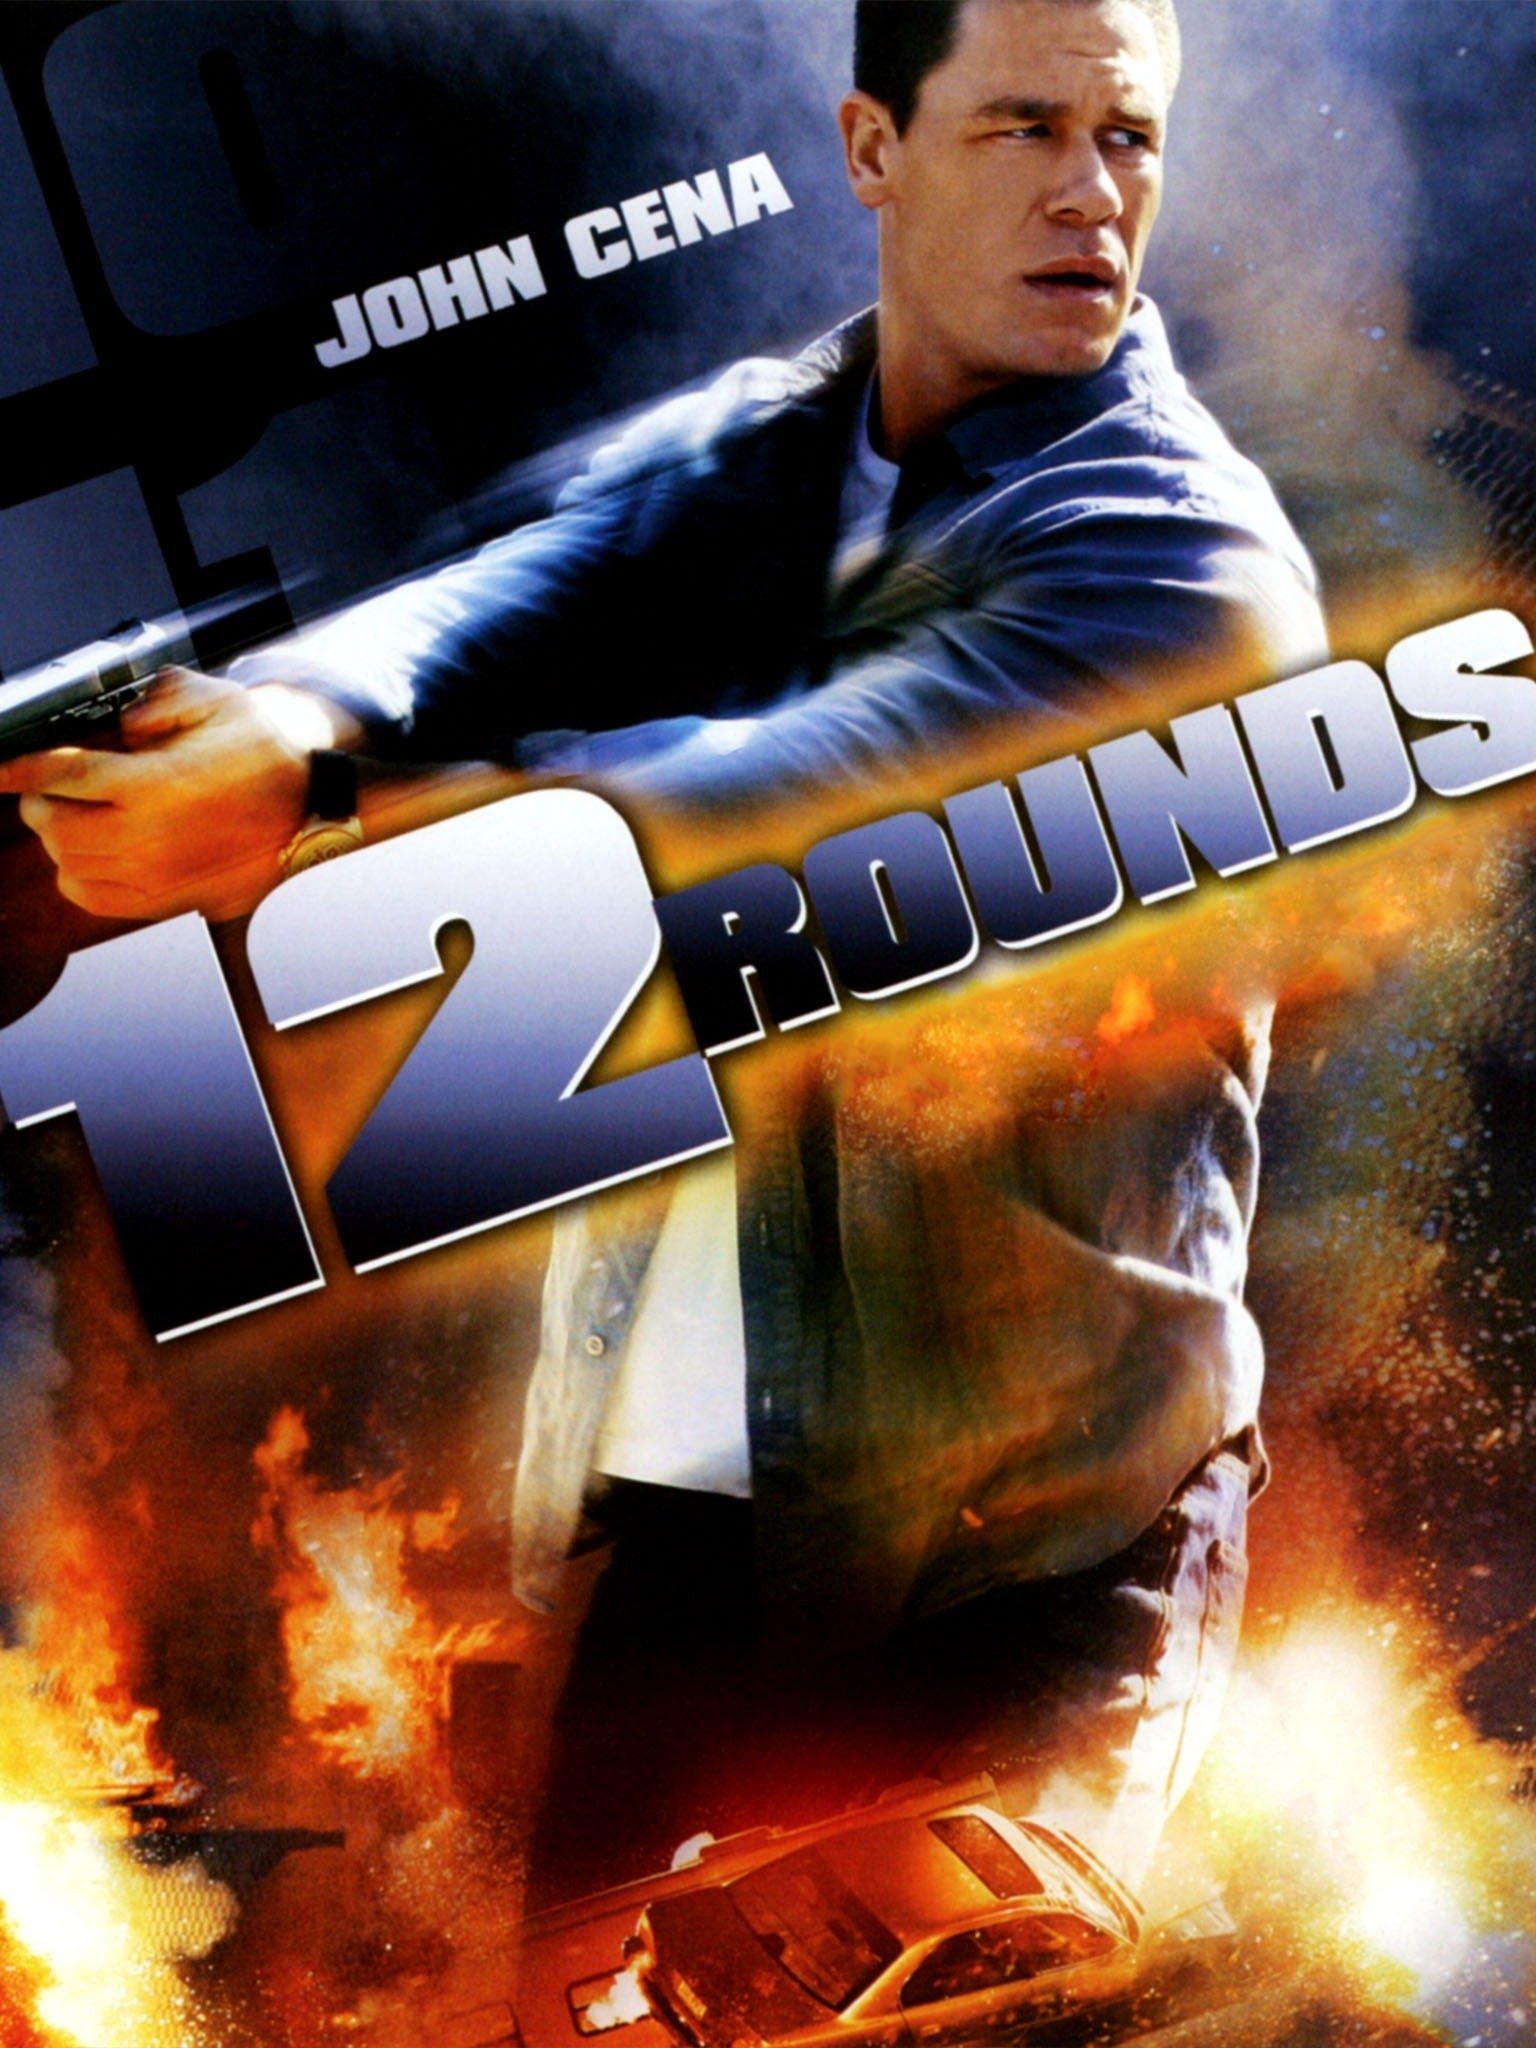 12 Rounds (2009) - Rotten Tomatoes